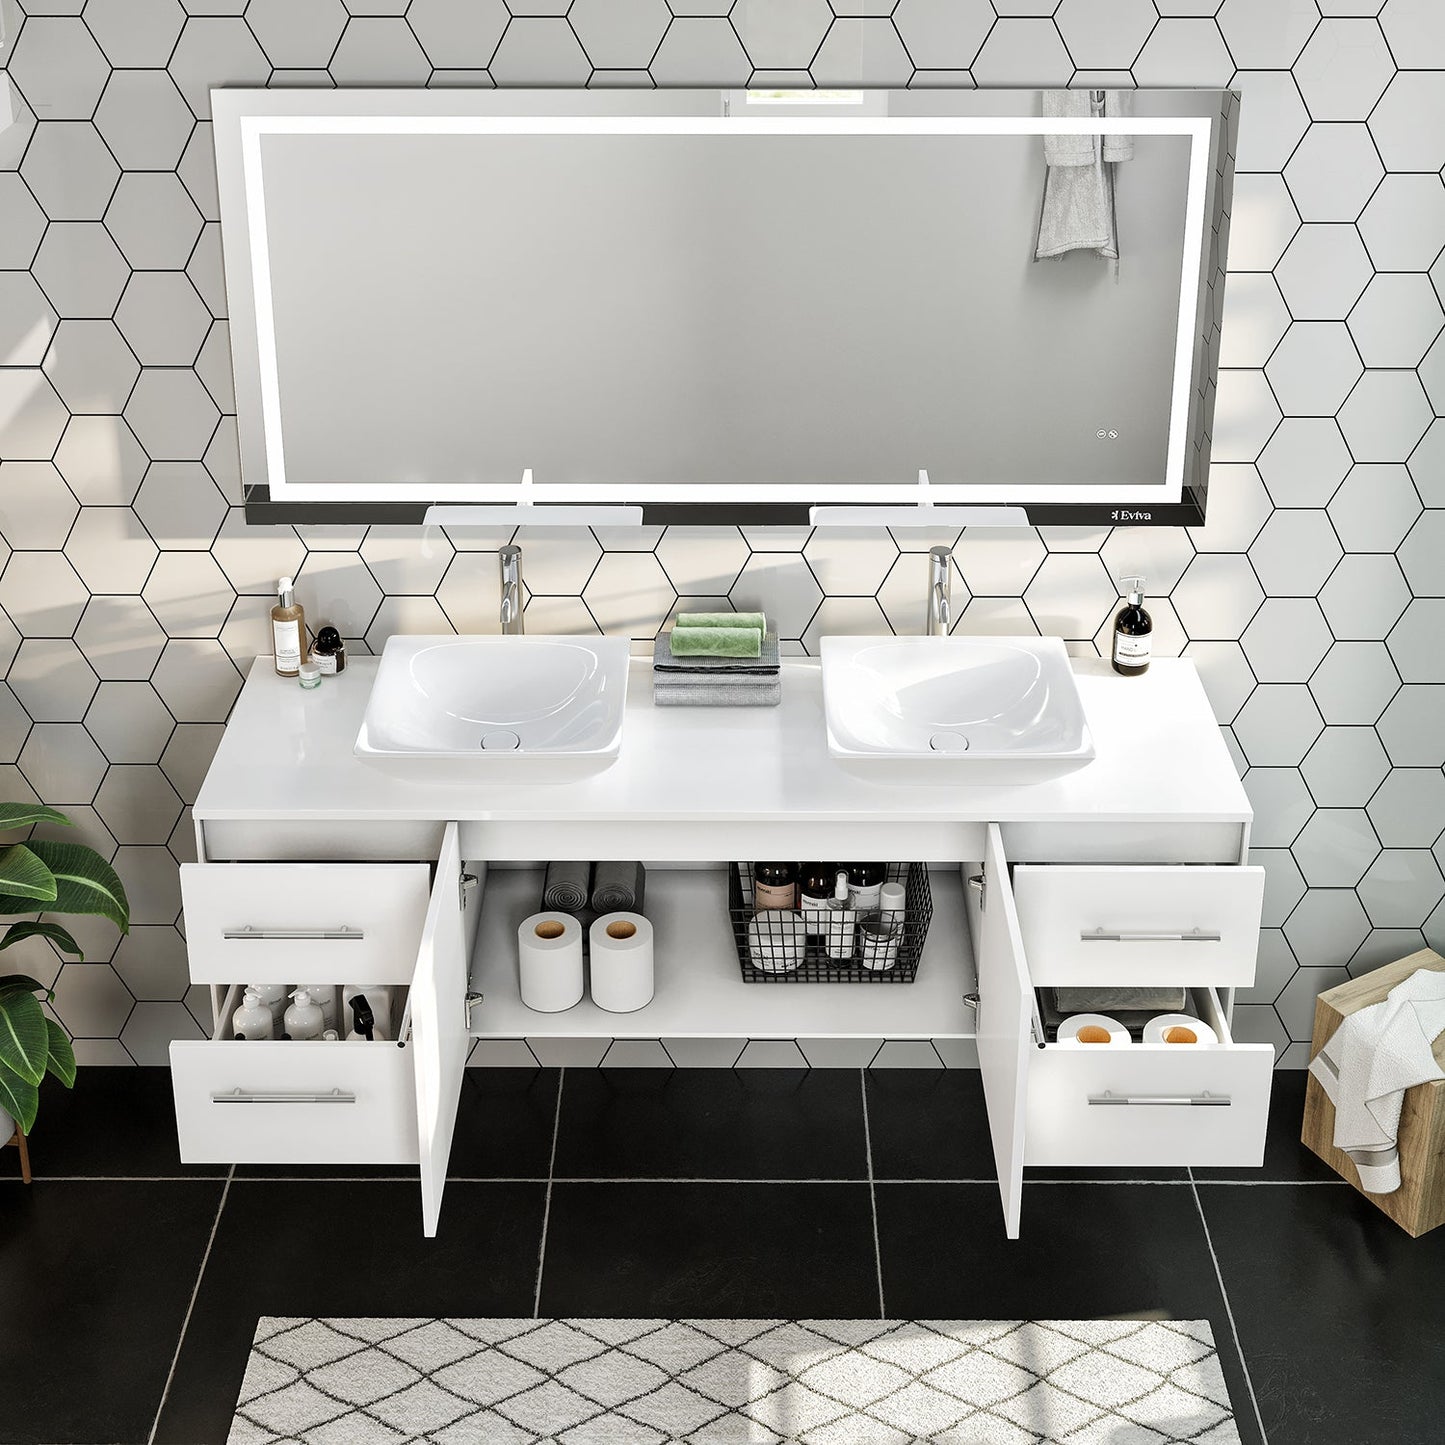 Wave 72"W x 22"D White Double Sink Bathroom Vanity with White Quartz Countertop and Vessel Porcelain Sink